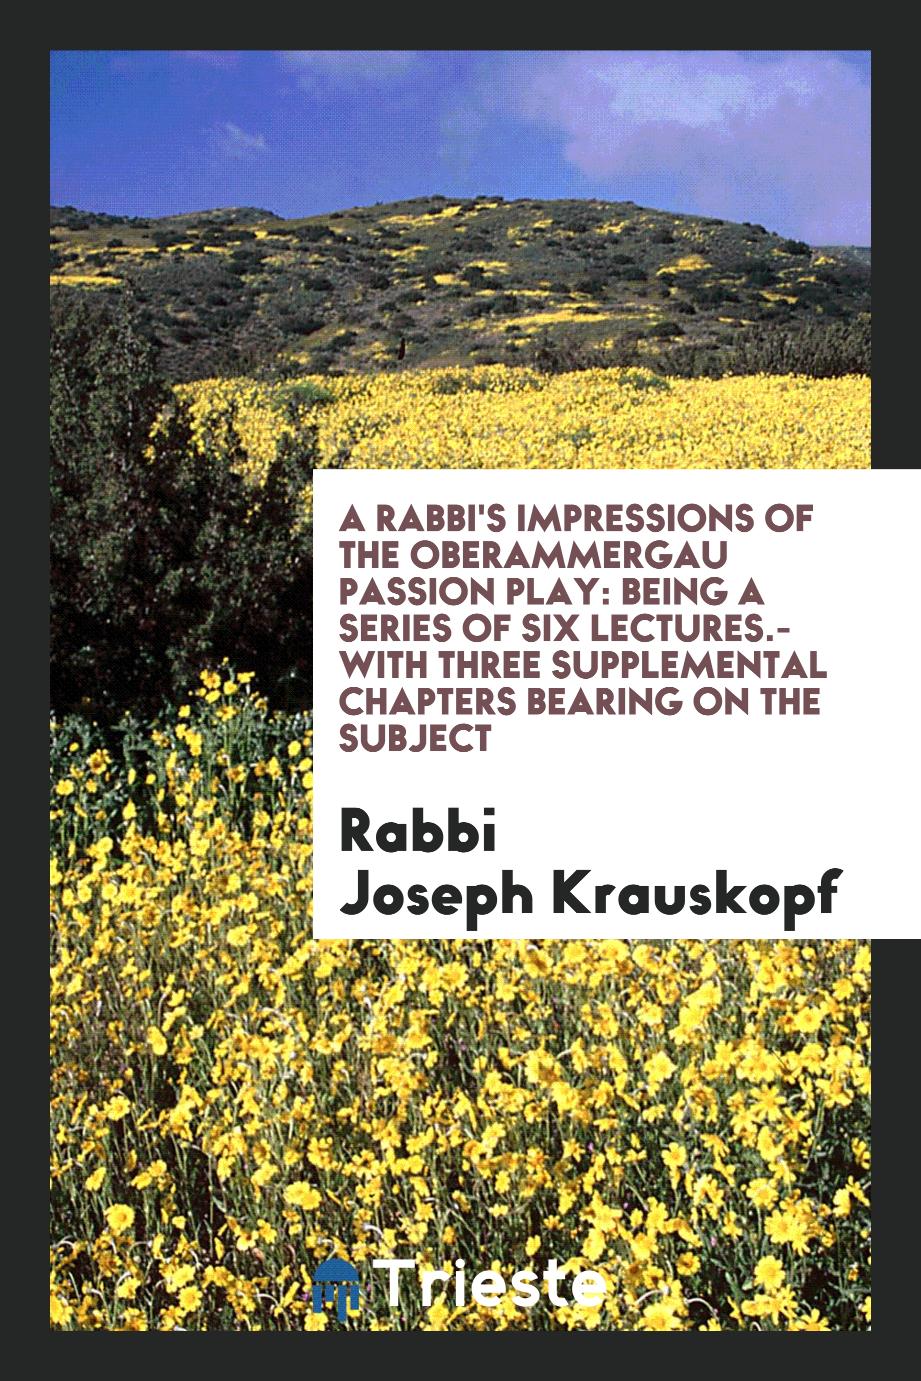 A Rabbi's Impressions of the Oberammergau Passion Play: Being a Series of Six Lectures.-With Three Supplemental Chapters Bearing on the Subject